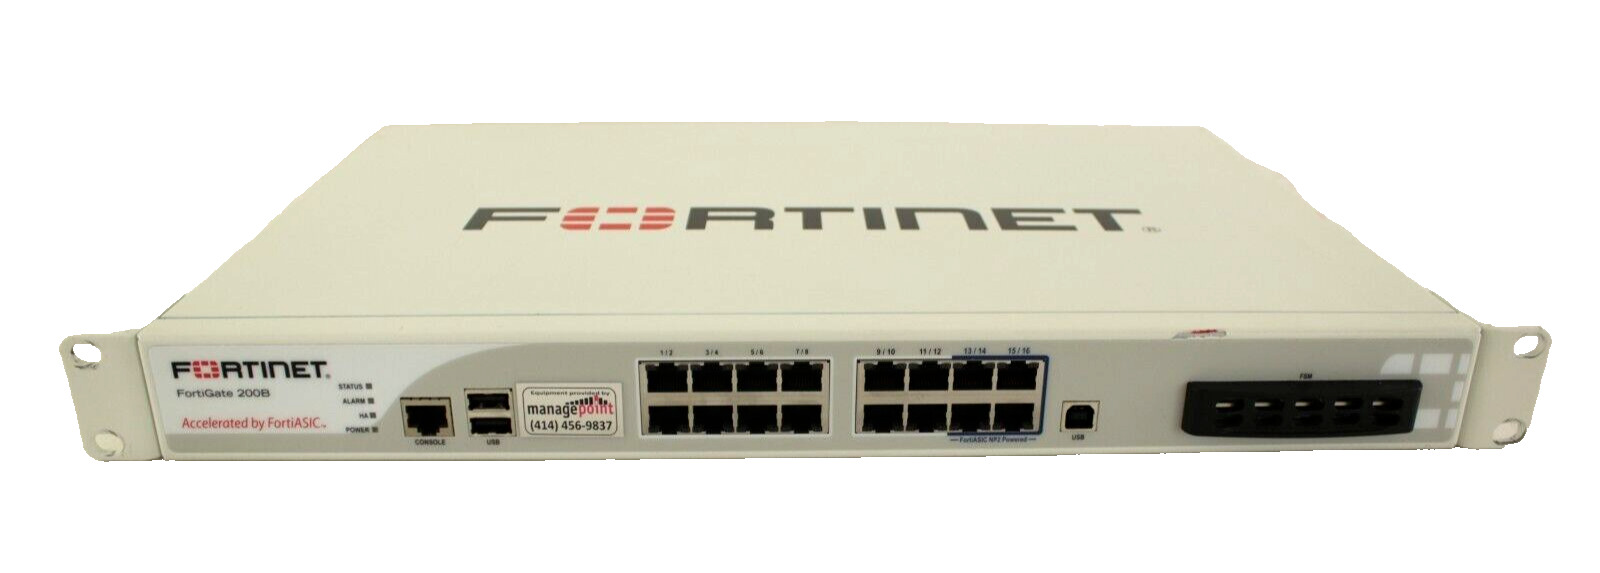 Fortinet FG-200B Fortigate 200B Firewall Network Security Device - Fast Shipping